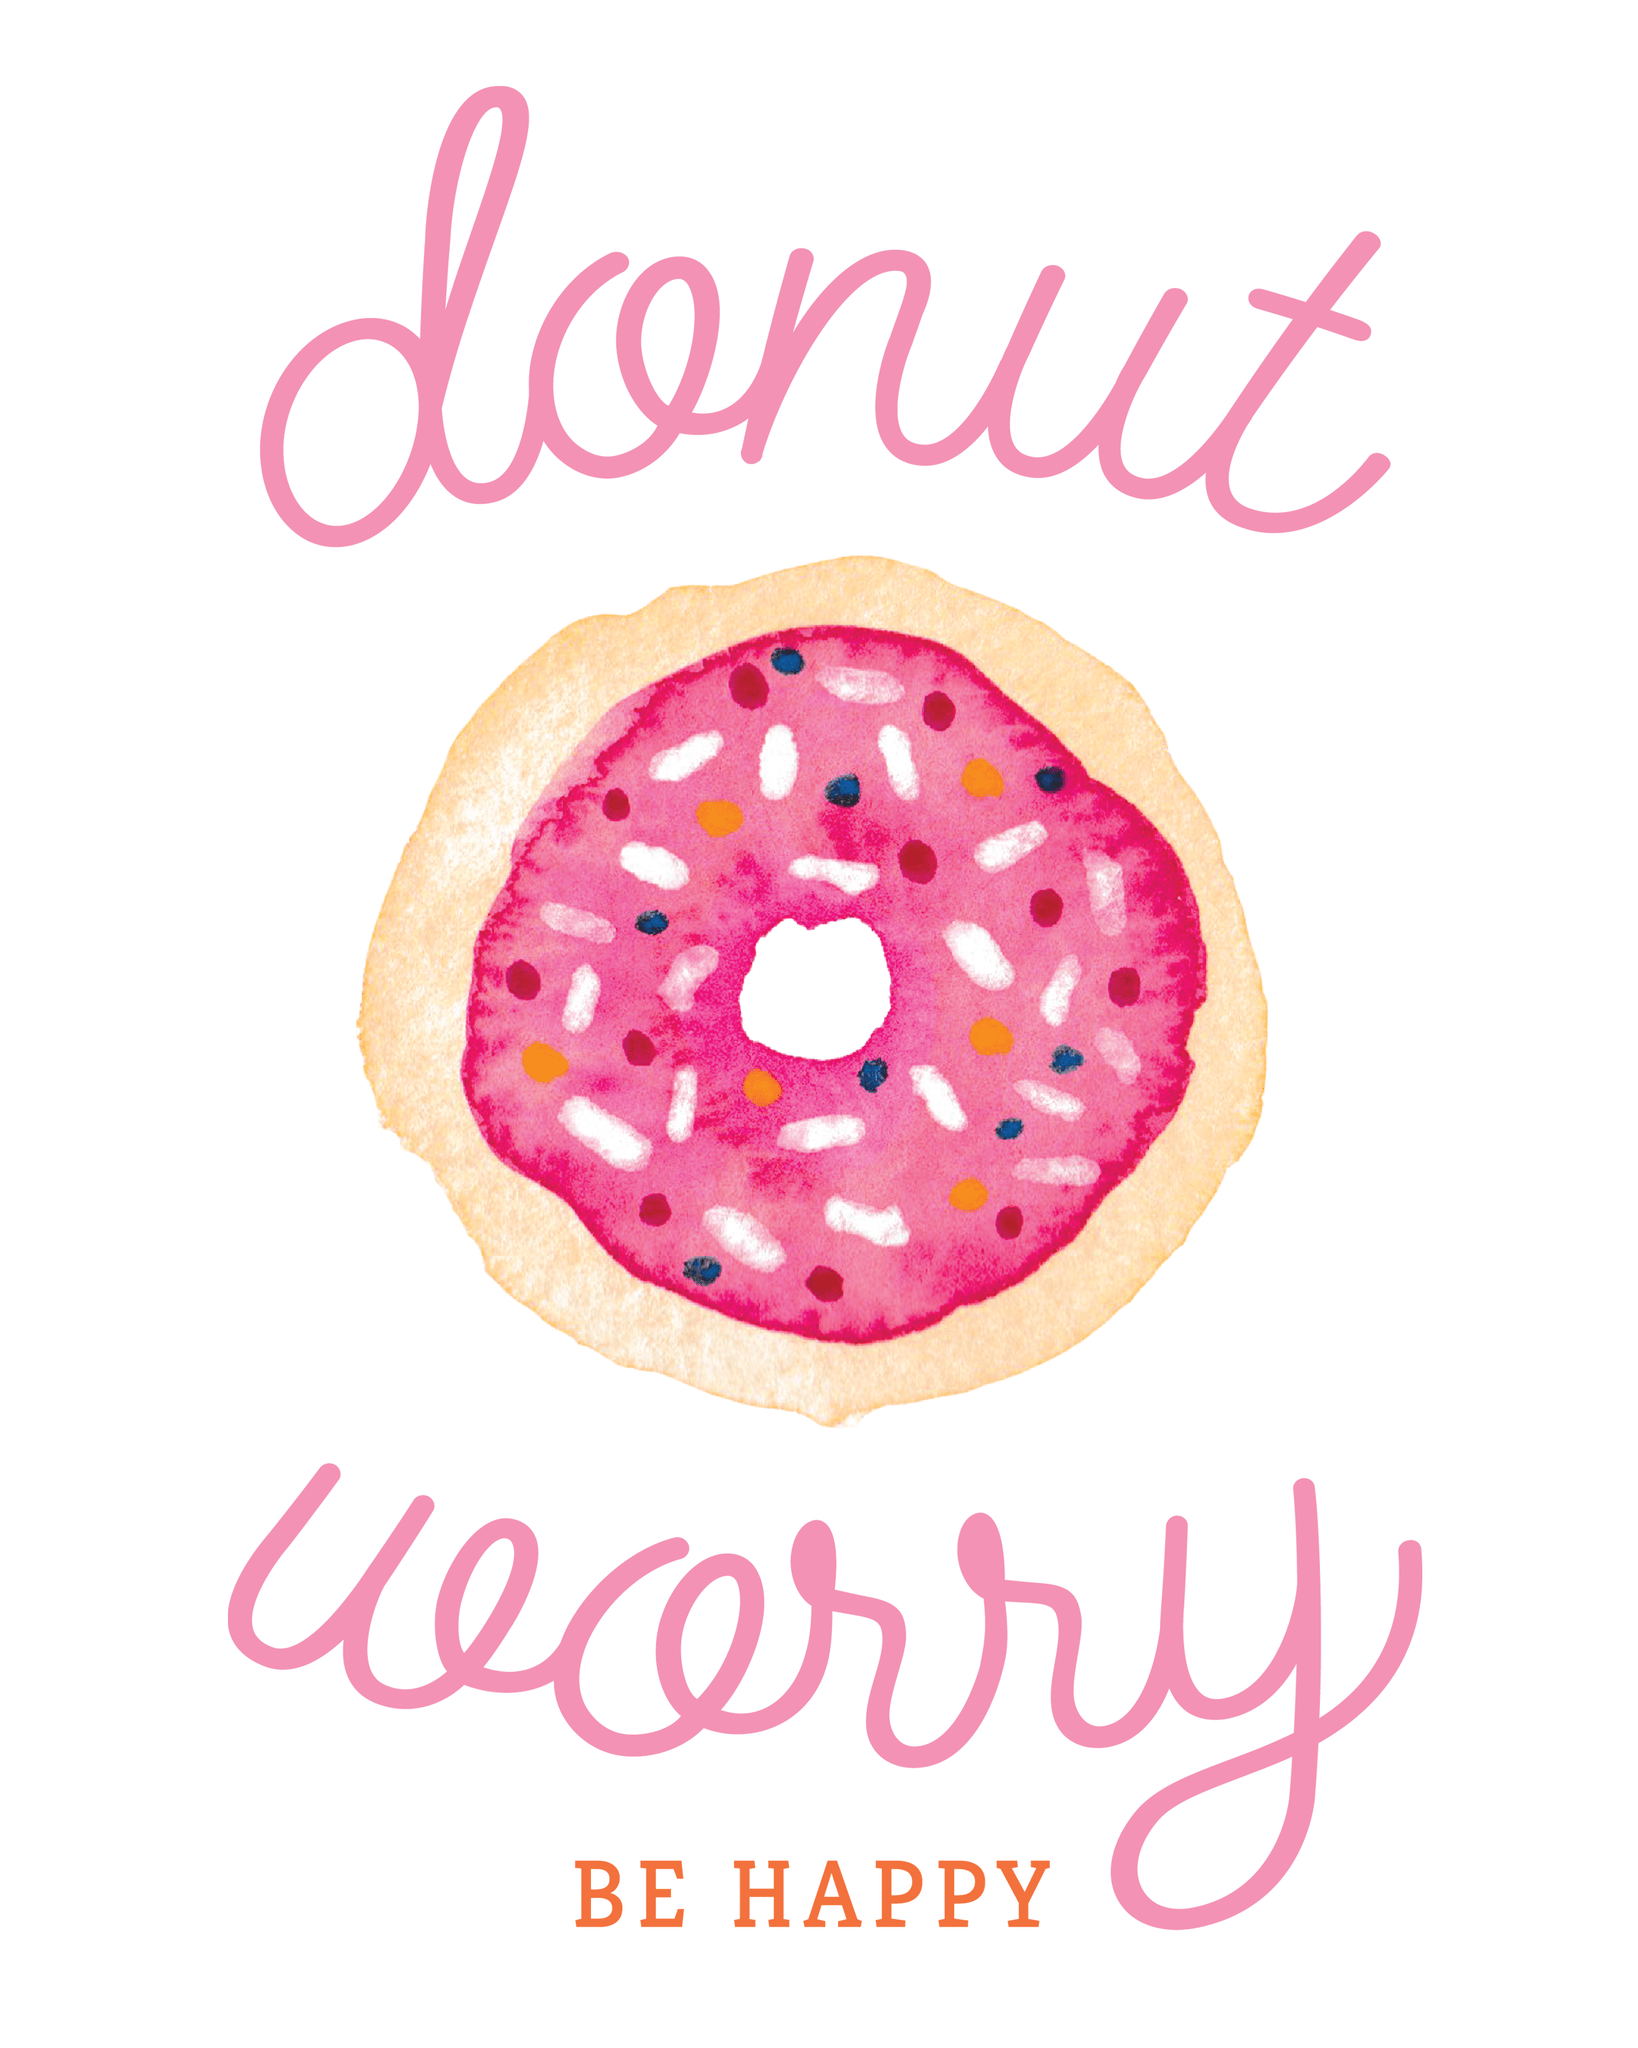 Donut Worry Be Happy Wallpapers Top Free Donut Worry Be Happy Backgrounds Wallpaperaccess 